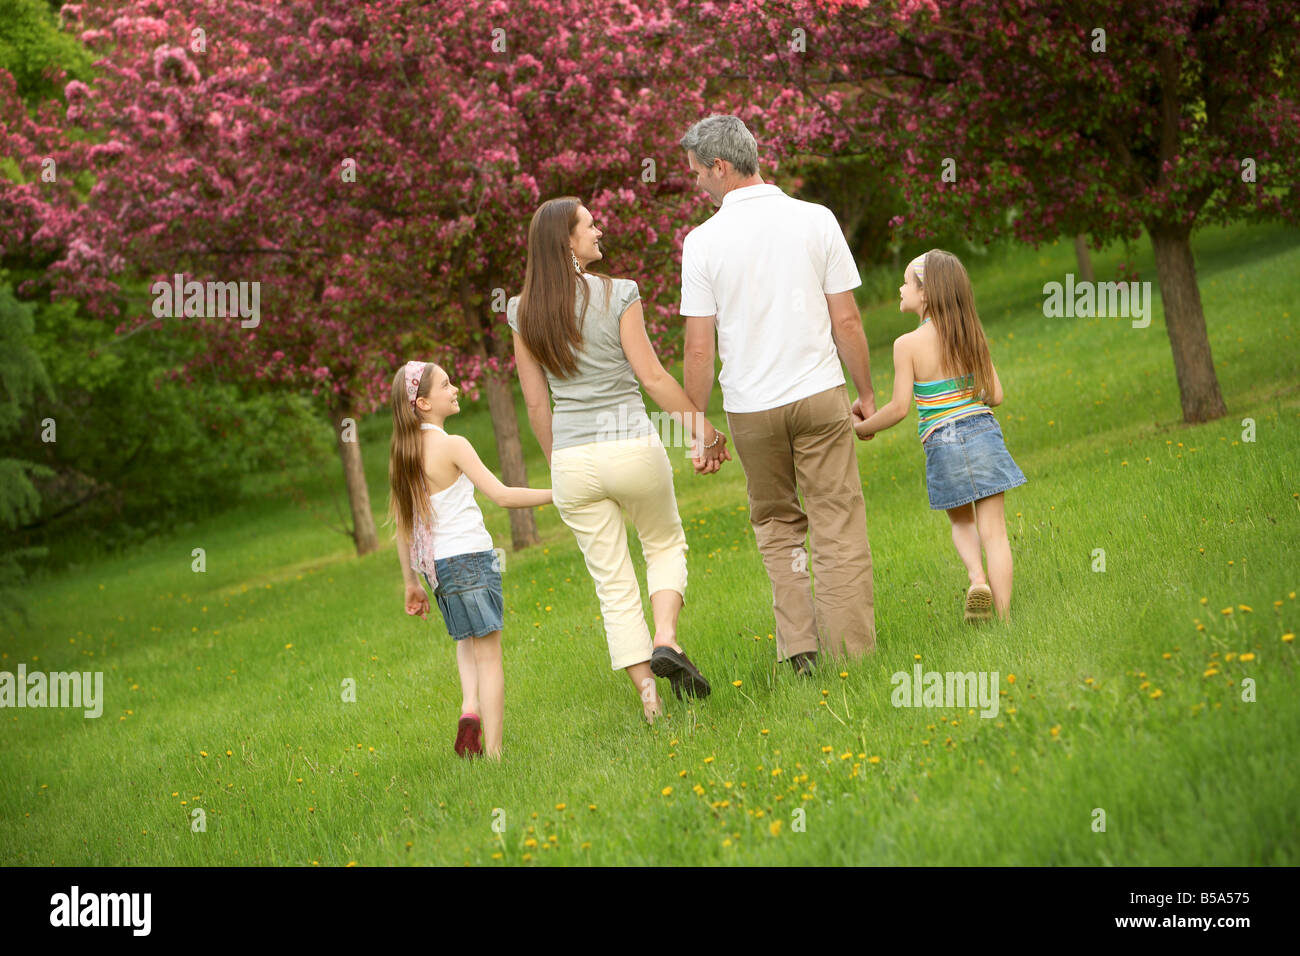 Family walking in a park Stock Photo